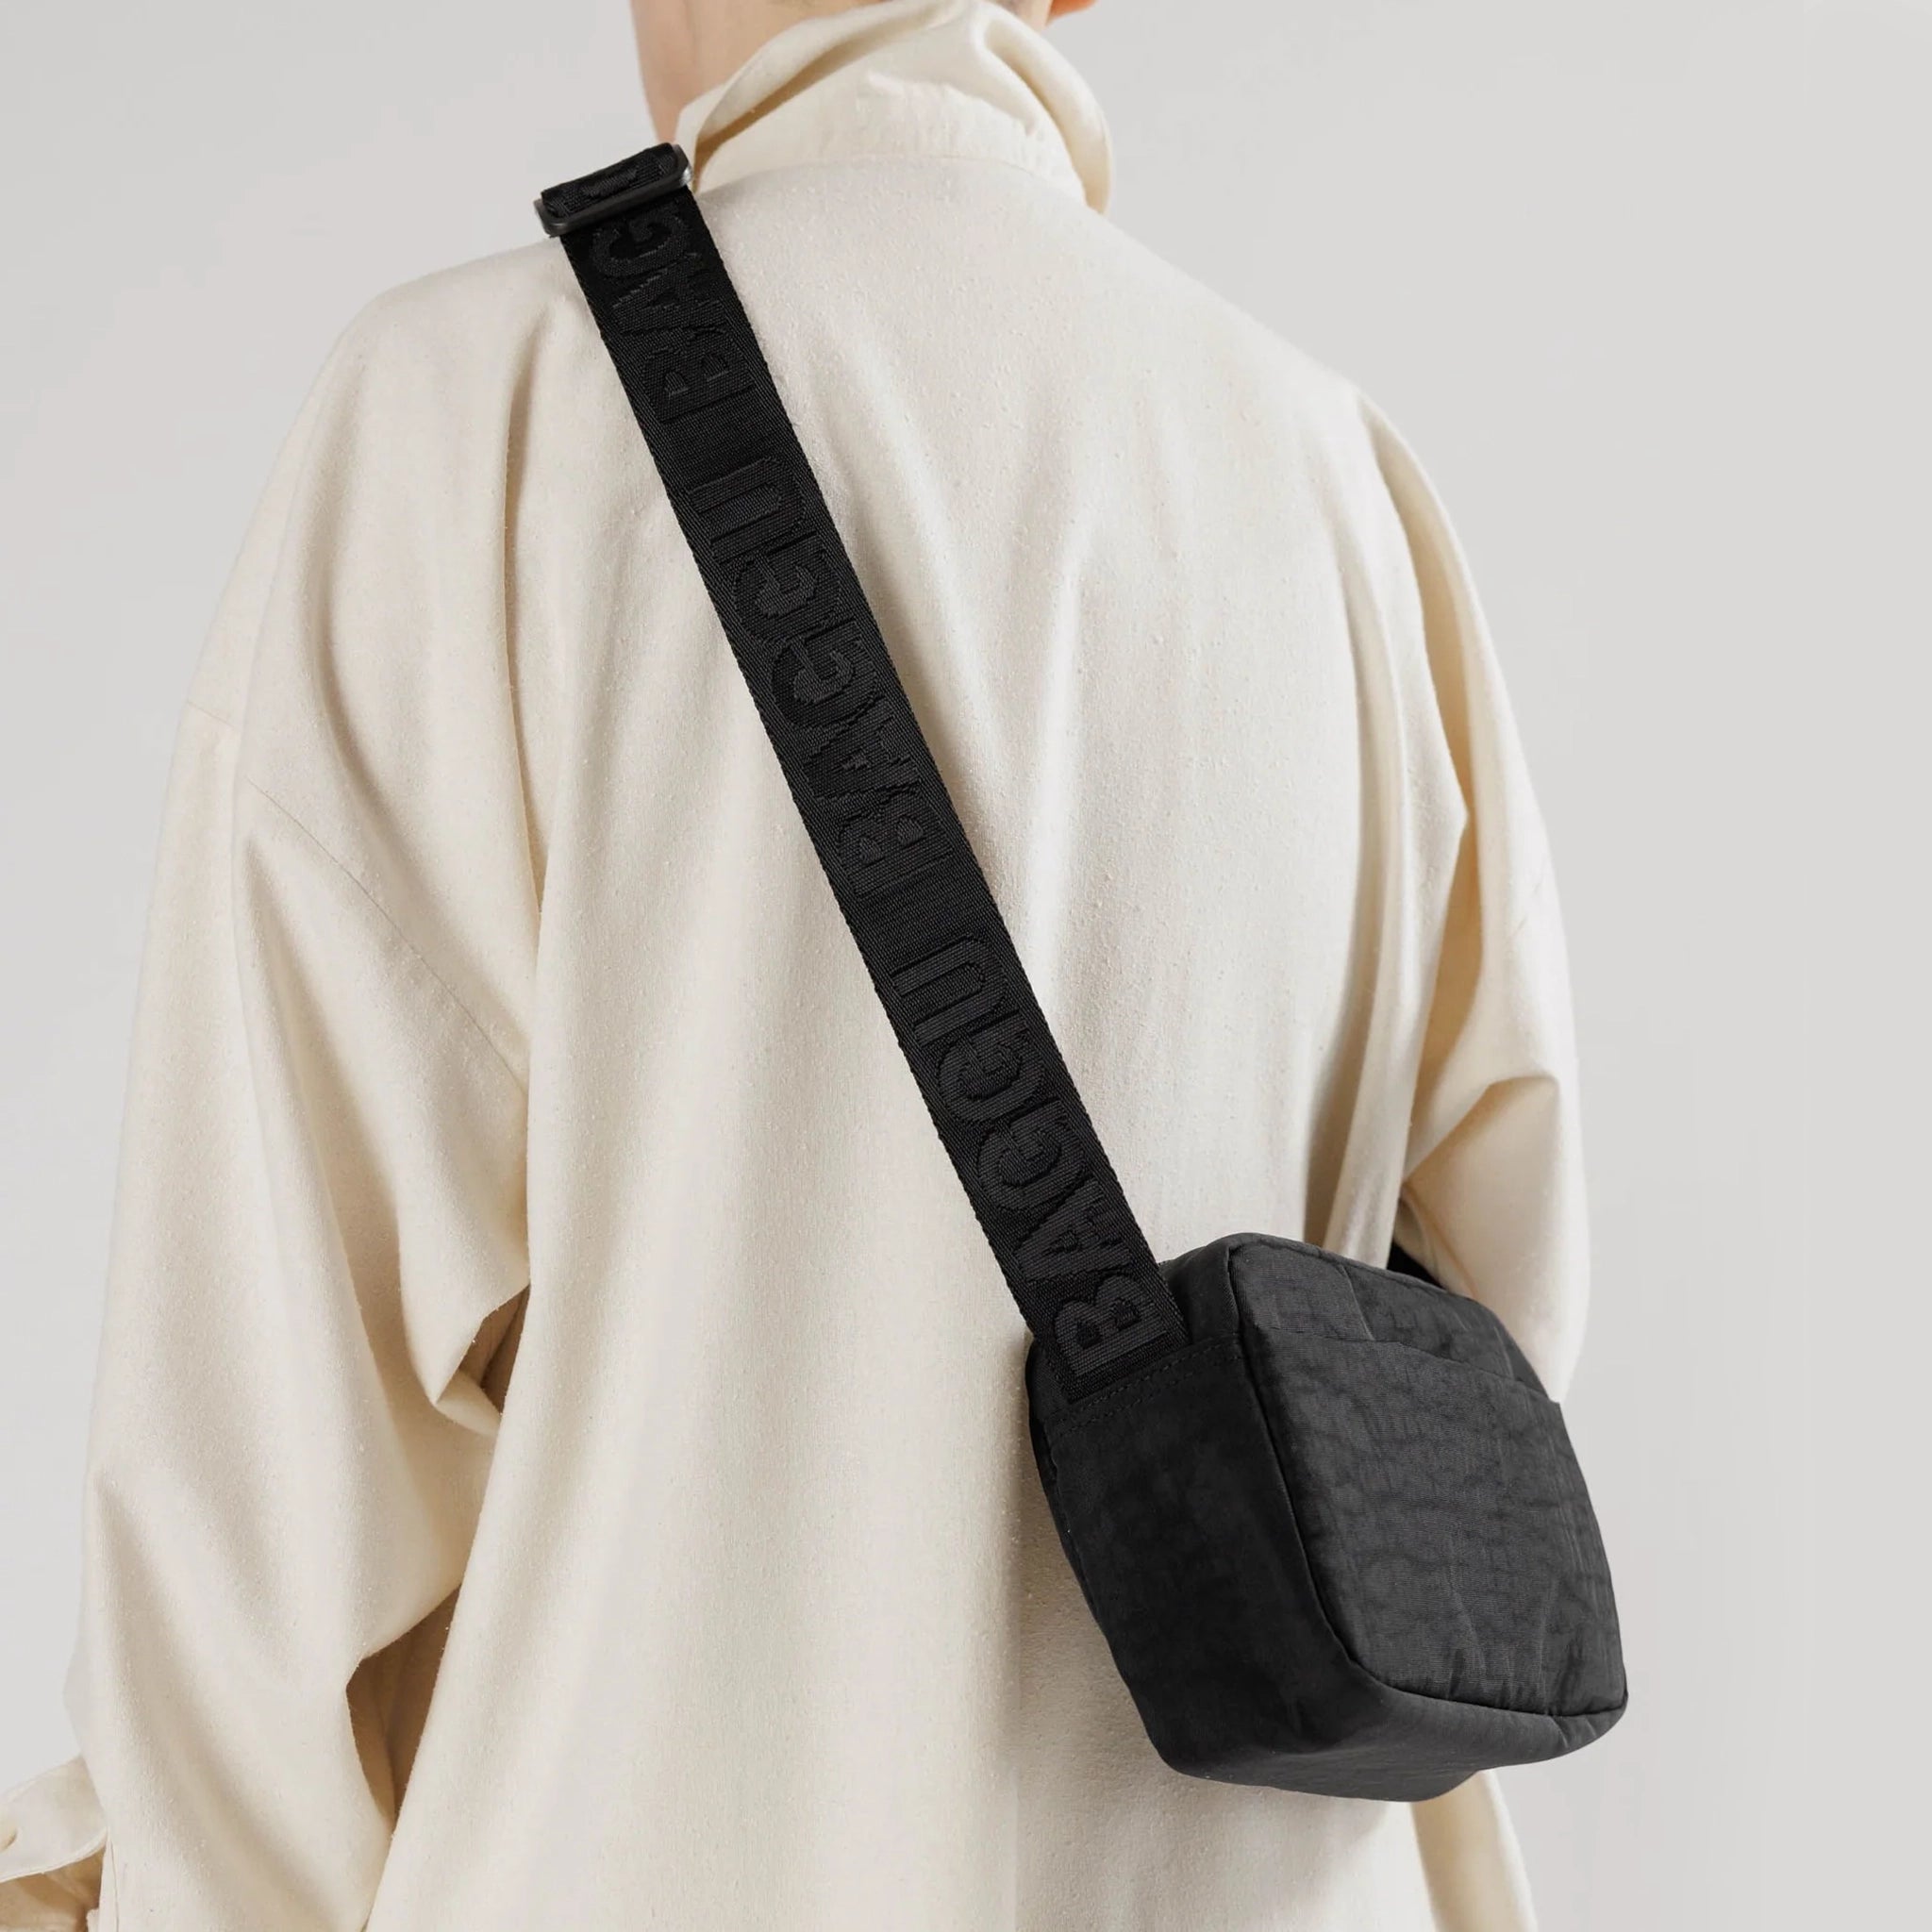 On a light grey background is a model wearing a black crossbody made of sturdy nylon material with a black adjustable strap that has &quot;BAGGU&quot; stitched into it in a shinier black material. 